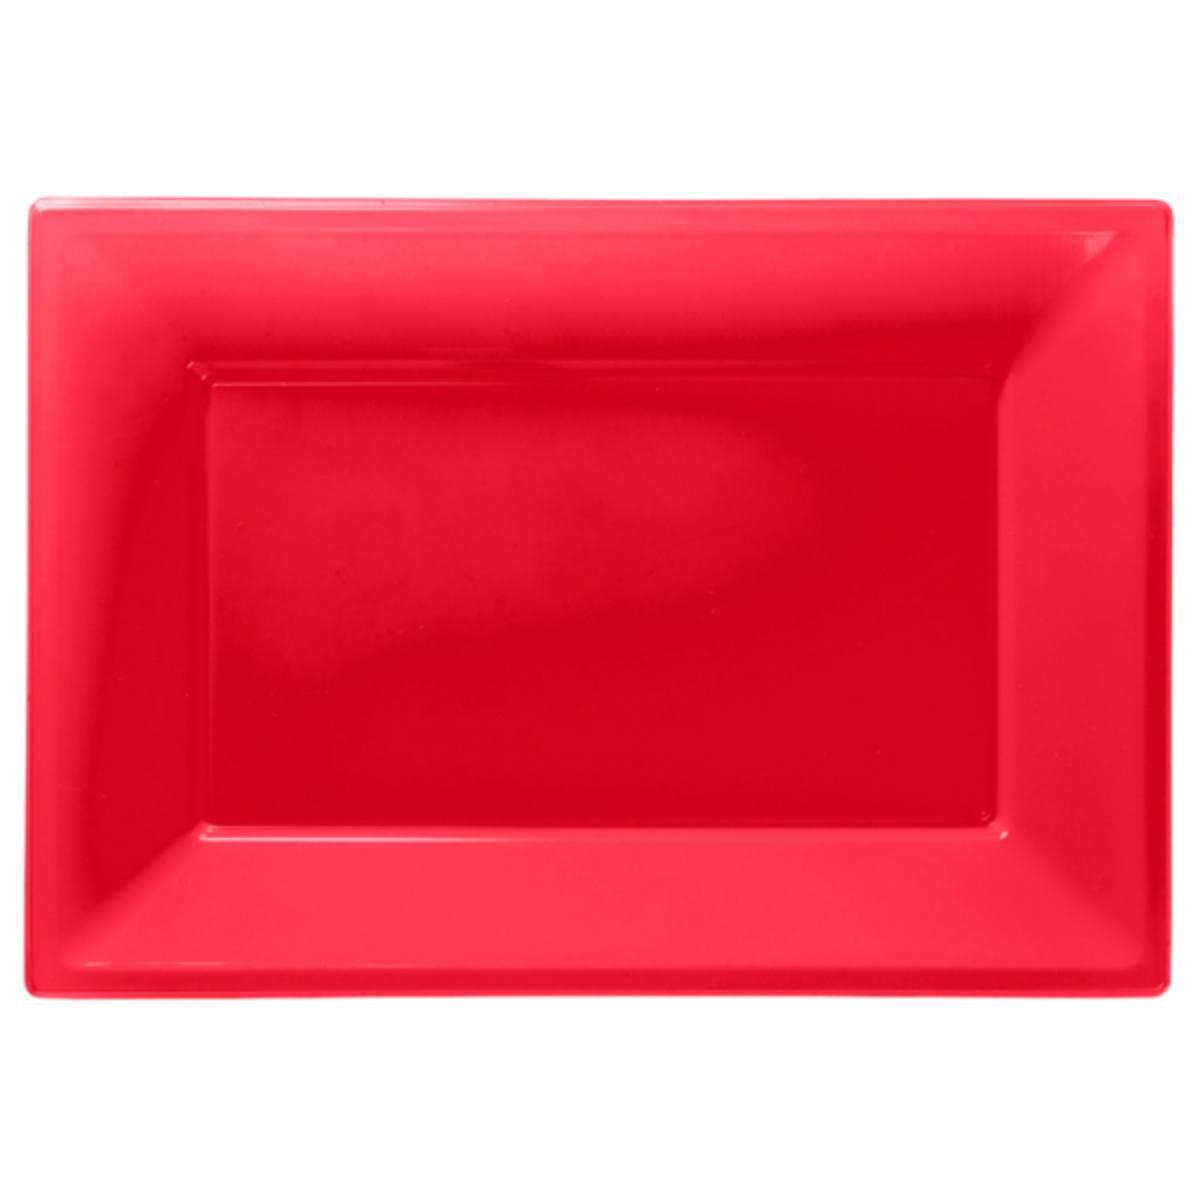 Apple Red Plastic Serving Platters - Pkt 3 individual trays by Amscan 997424 from Karnival Costumes